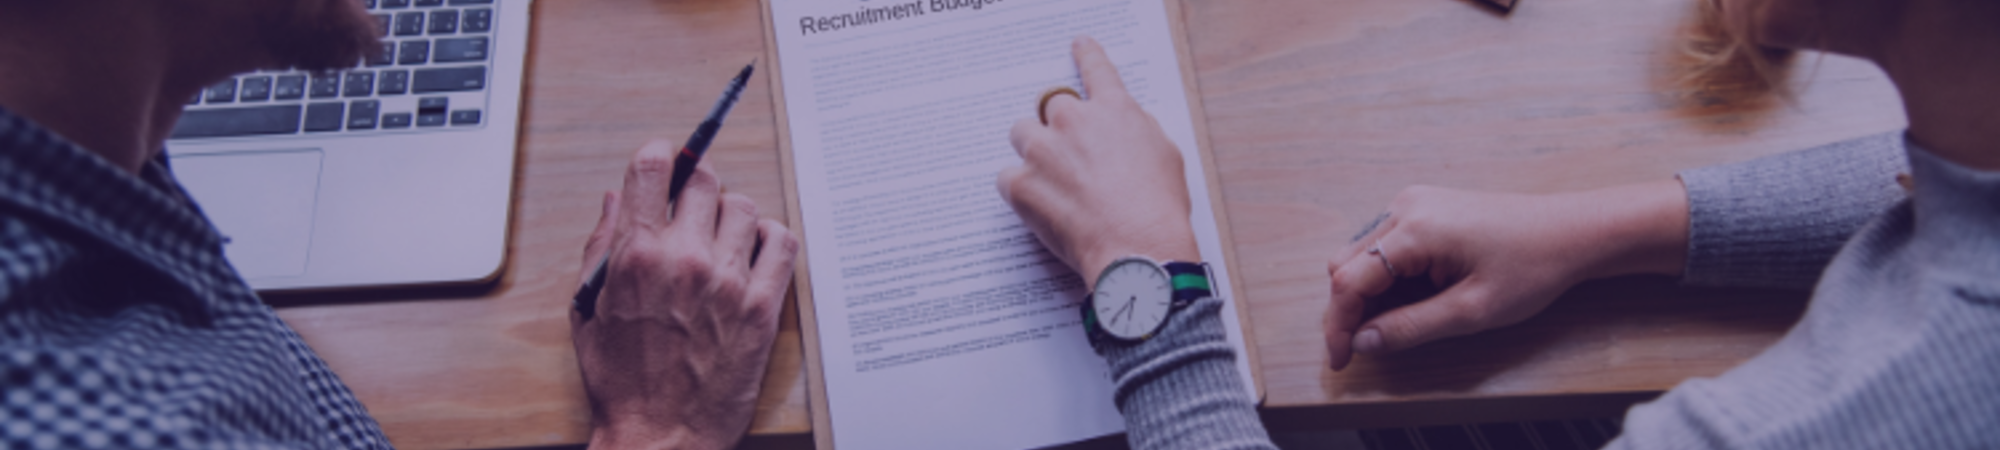 Recruitment Fees - Do You Know What You're Paying For